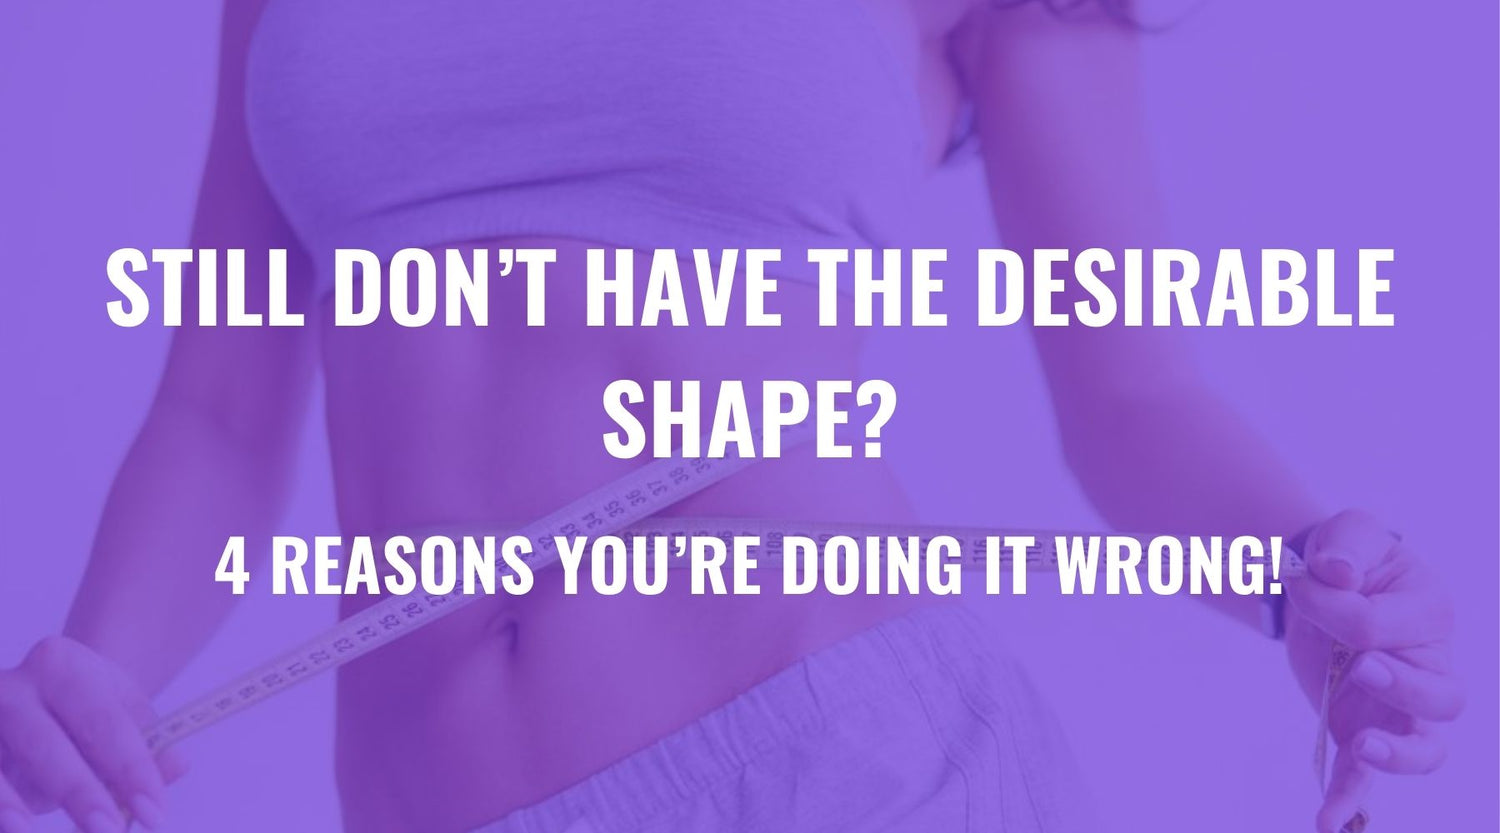 Still Don’t Have The Desirable Shape? 4 Reasons You’re Doing It Wrong!